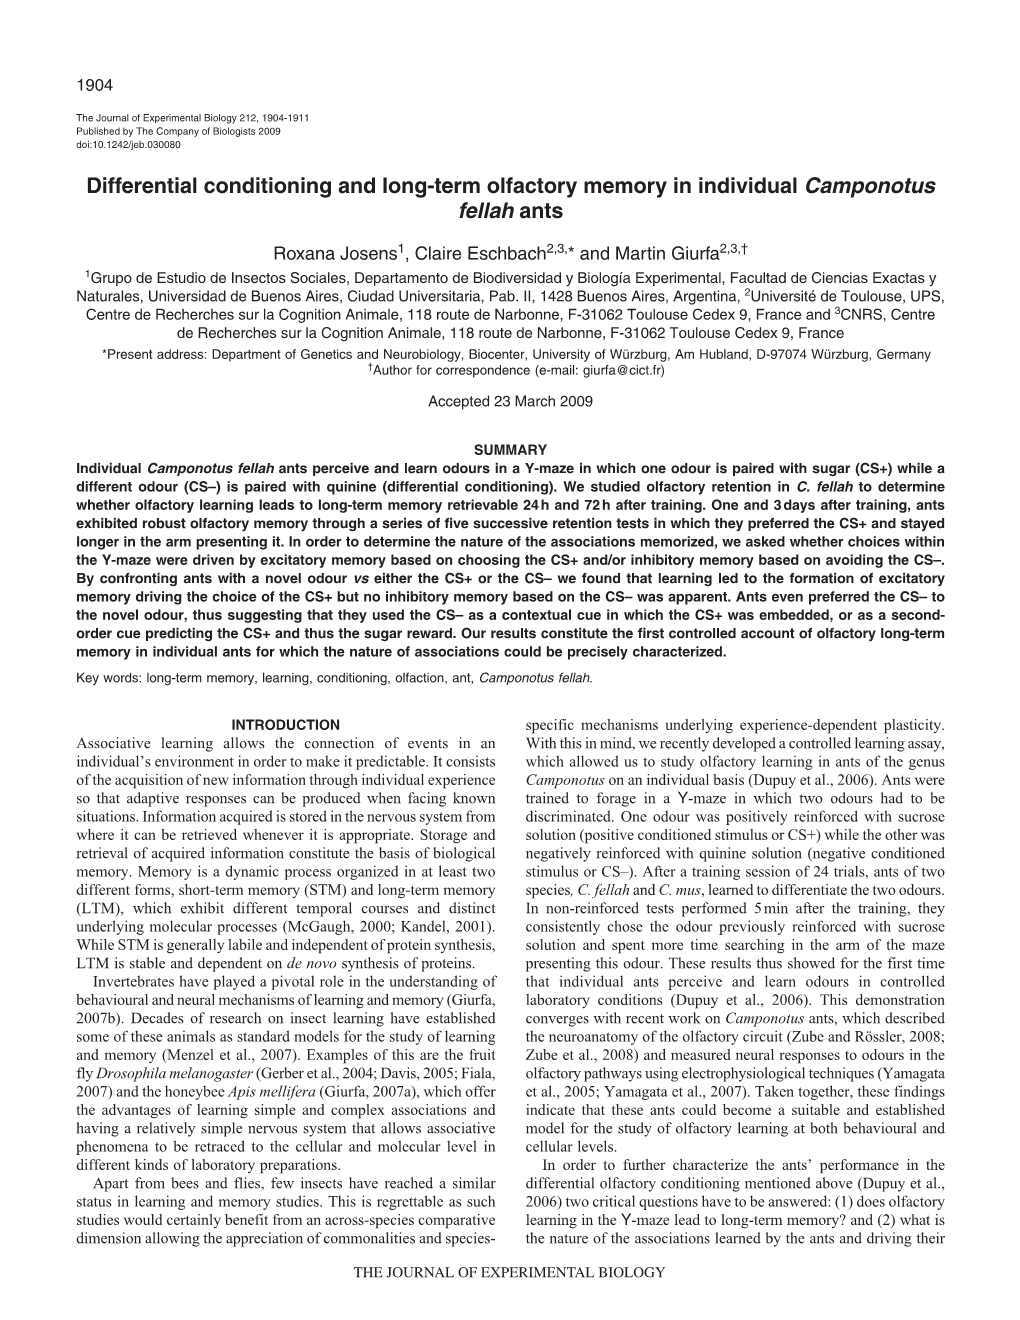 Differential Conditioning and Long-Term Olfactory Memory in Individual Camponotus Fellah Ants